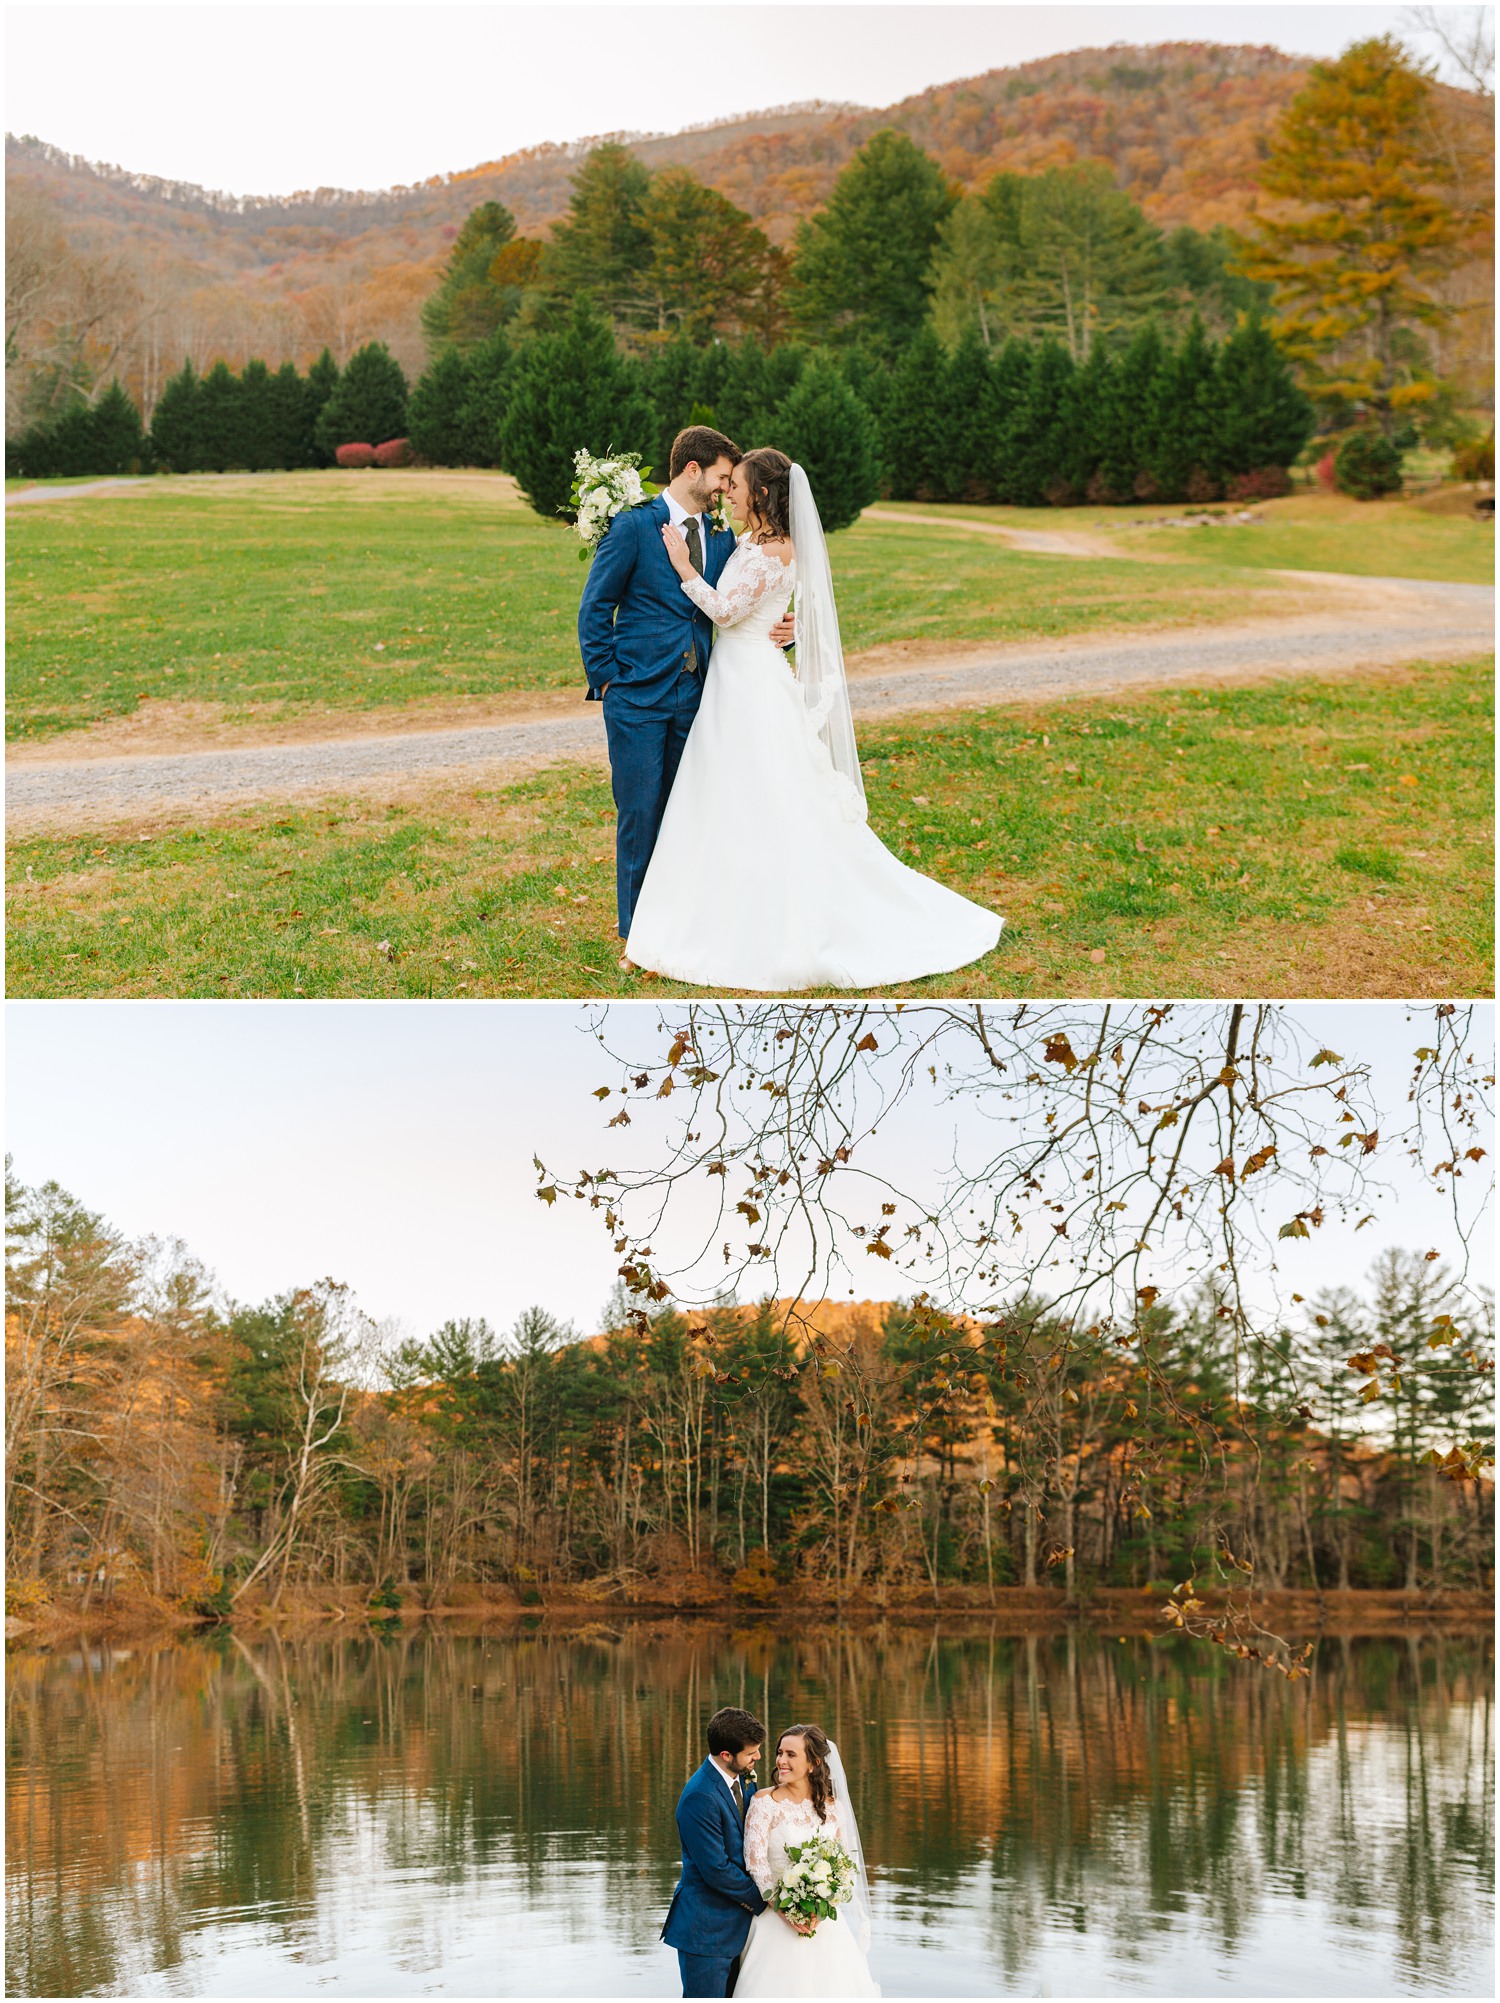 fall wedding portraits of bride with lace sleeves on gown and groom in navy suit looking at each other